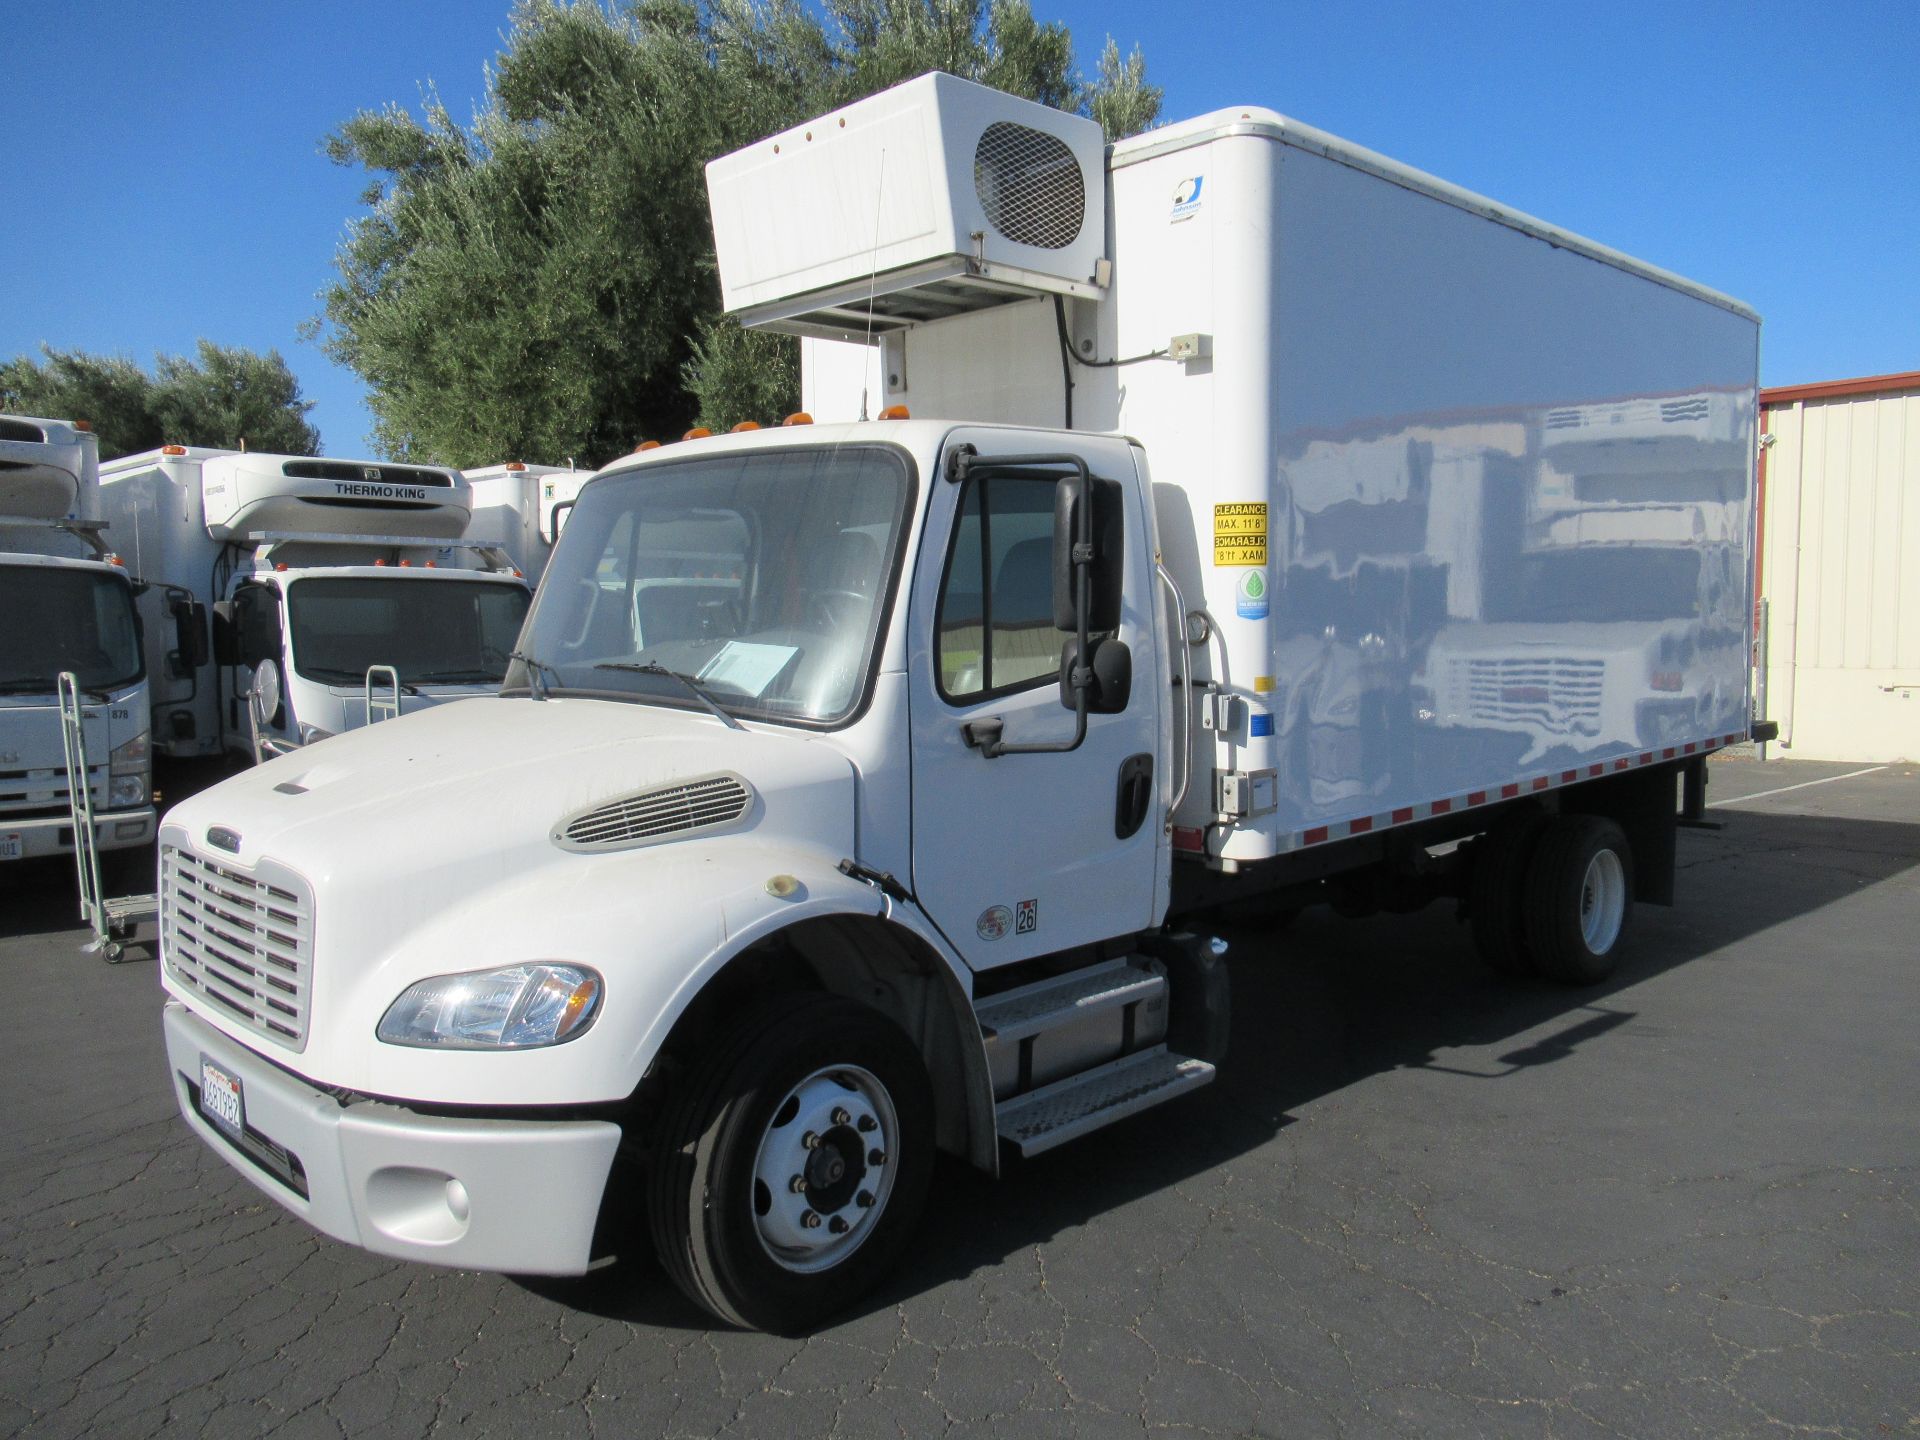 2016 Freightliner refrigerated truck - Image 3 of 11